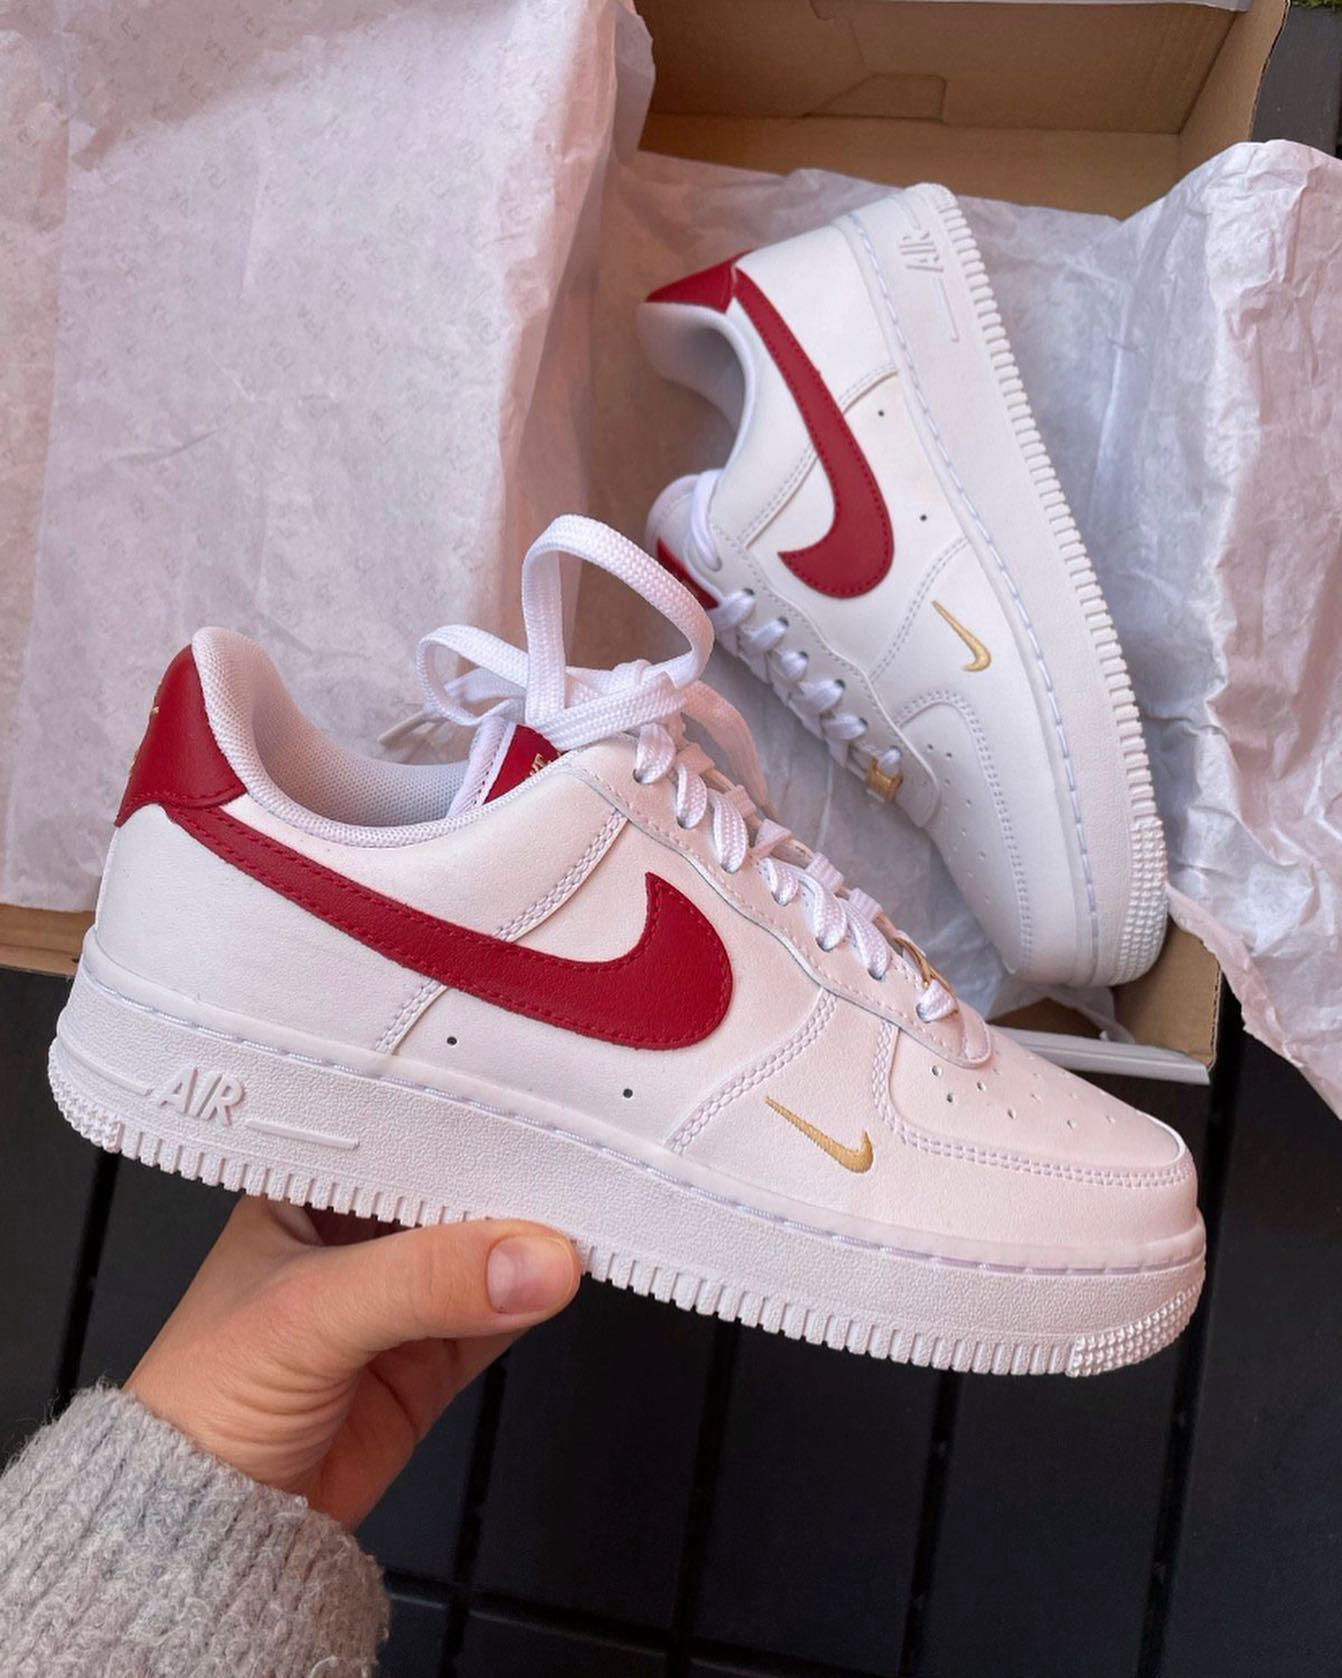 Nike Air Force 1 - Thoughts on these